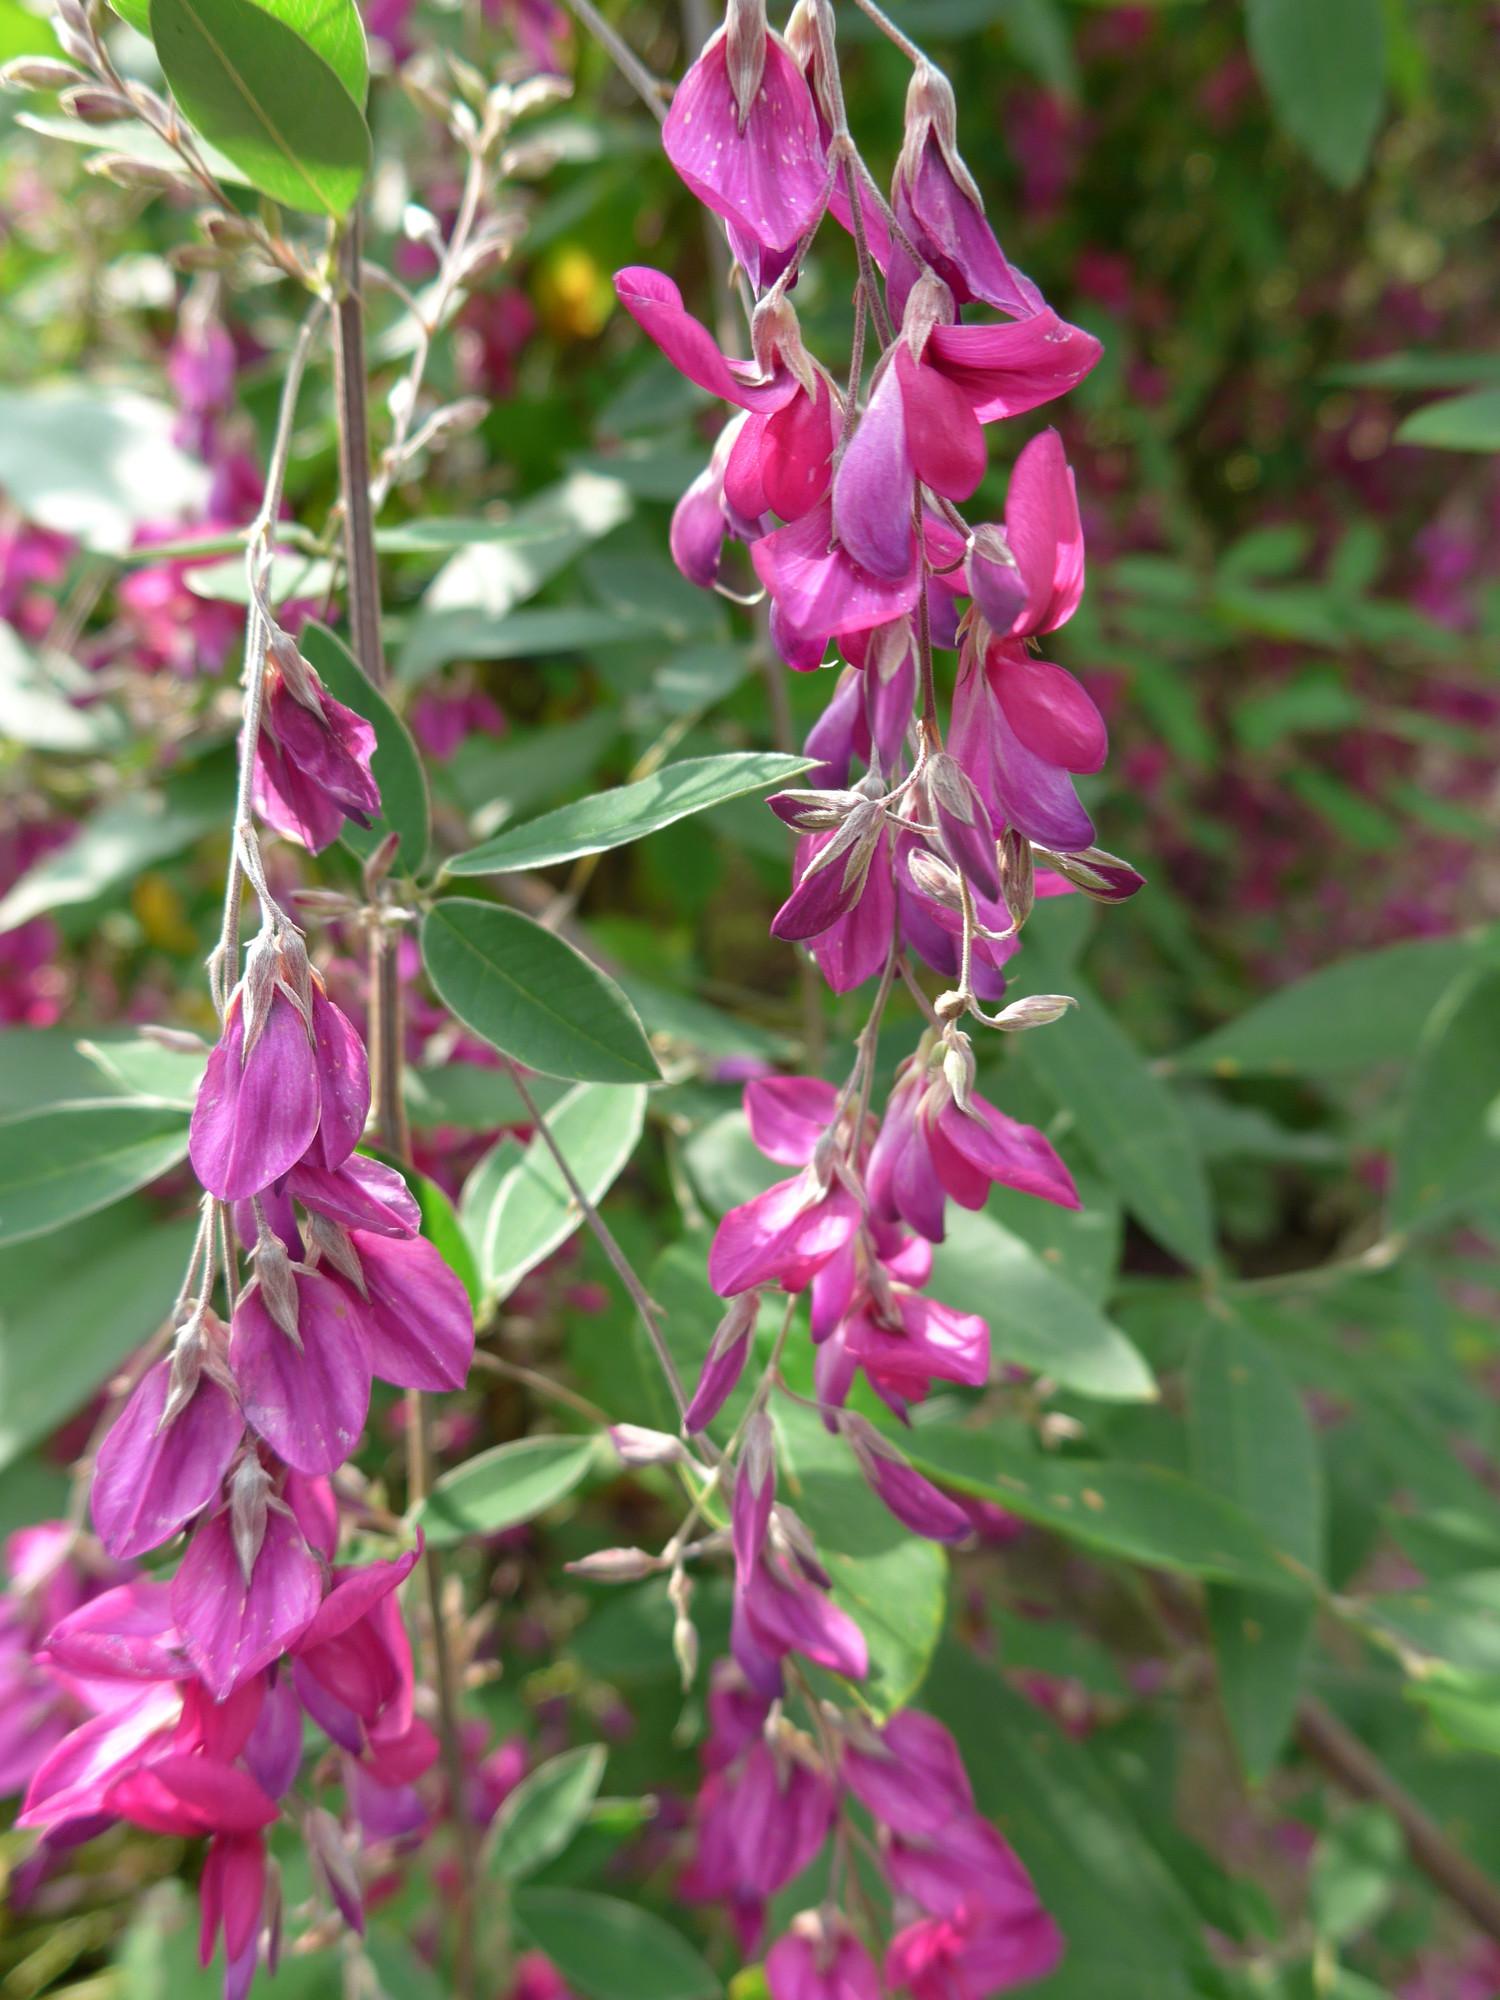 Magenta-purple flowers and purlpe buds, white stems and green leaves.